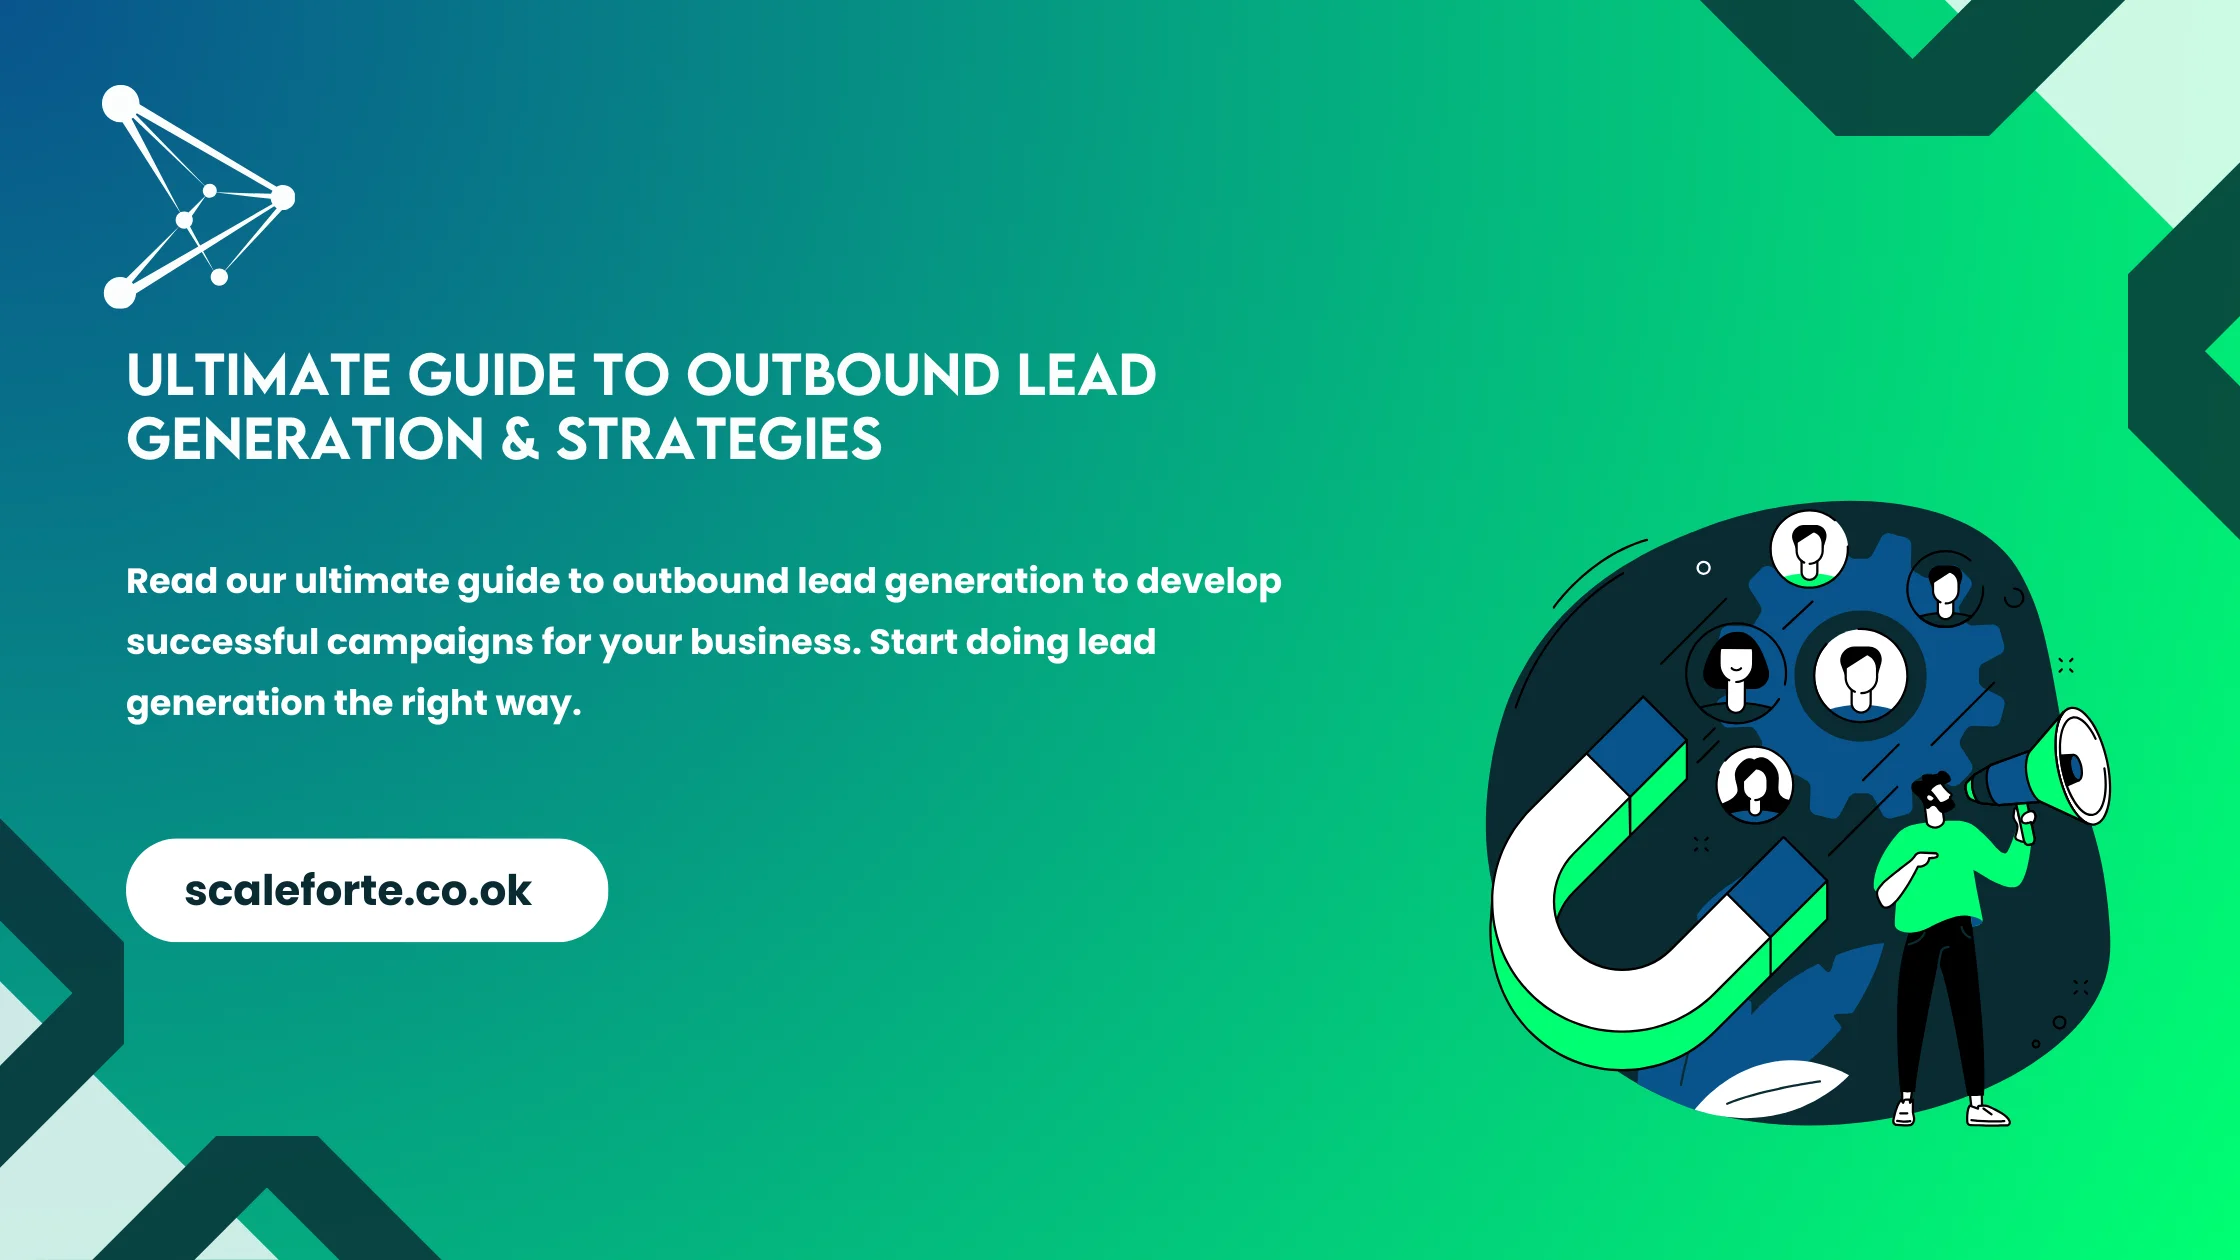 Outbound lead generation strategies